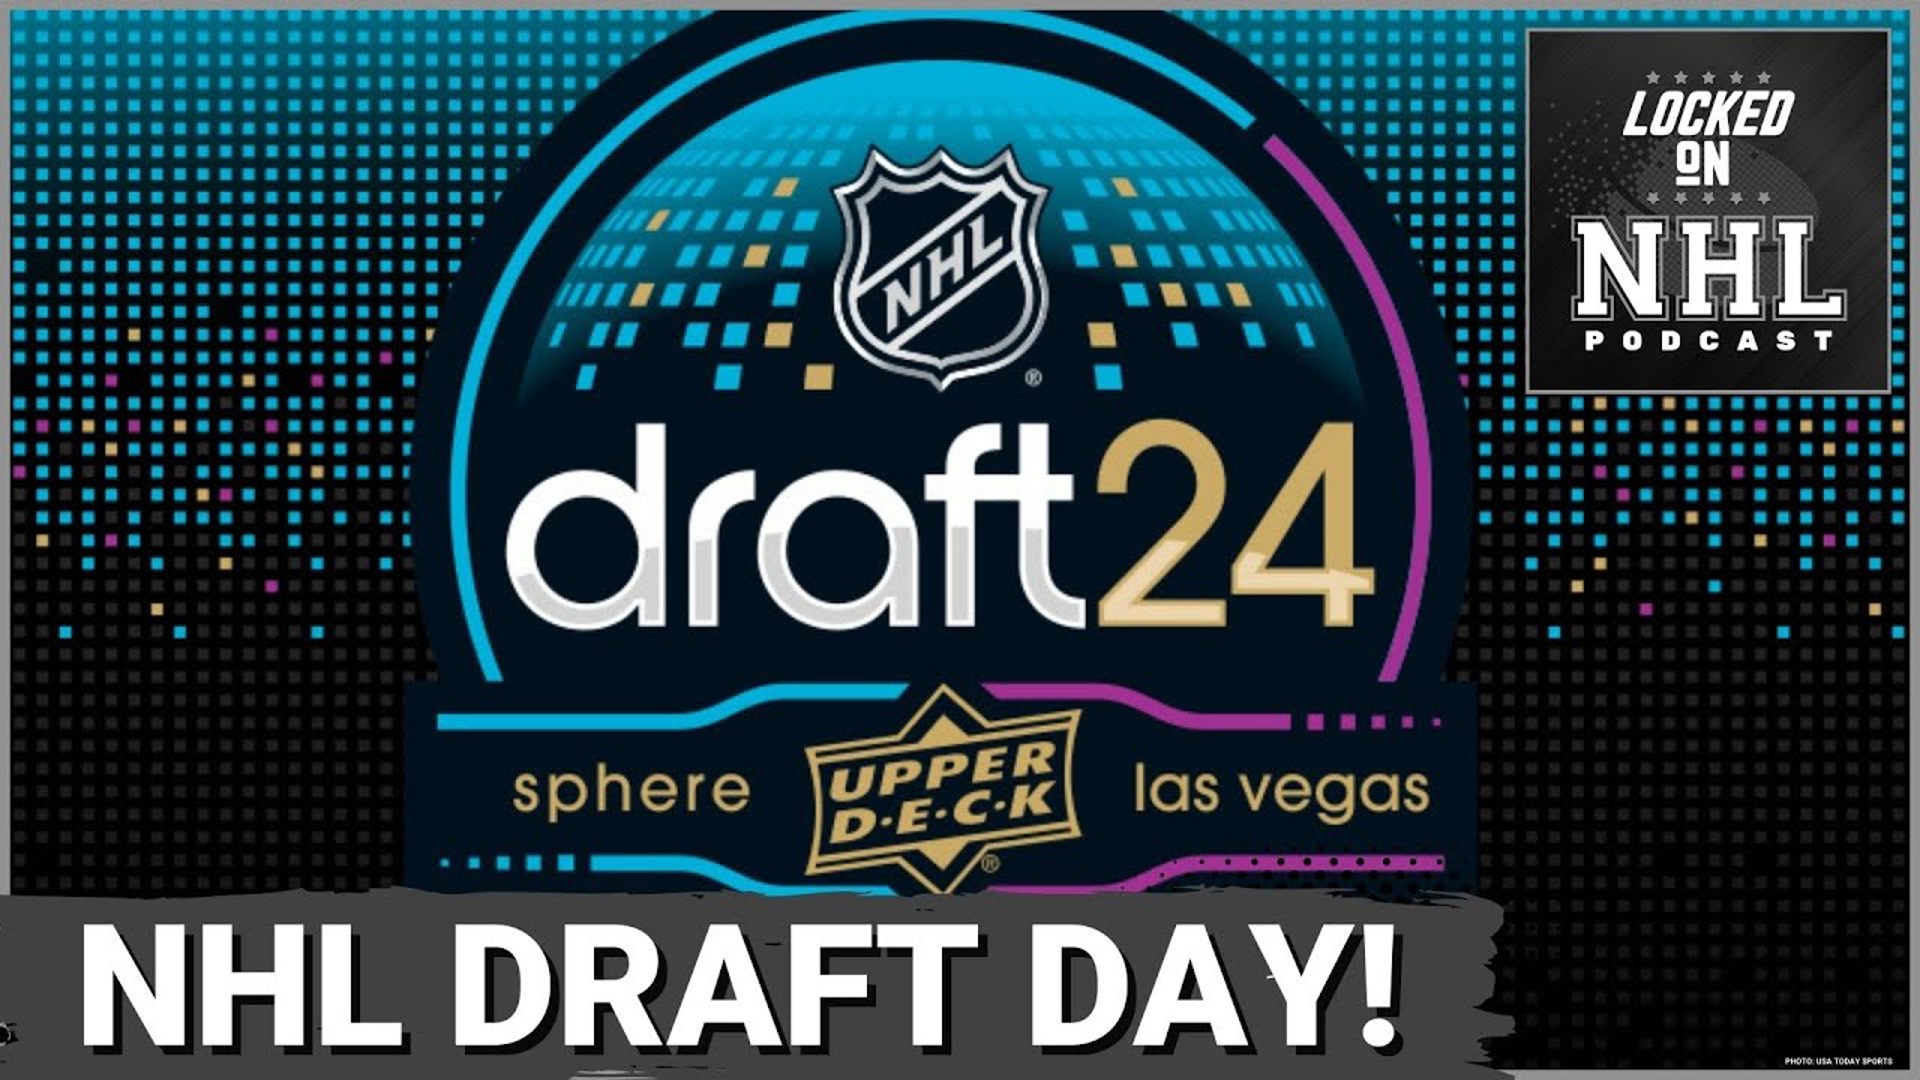 The NHL Draft starts tonight and this will change the future of every team in the league. We have everything covered from trade rumors to who will be picked where